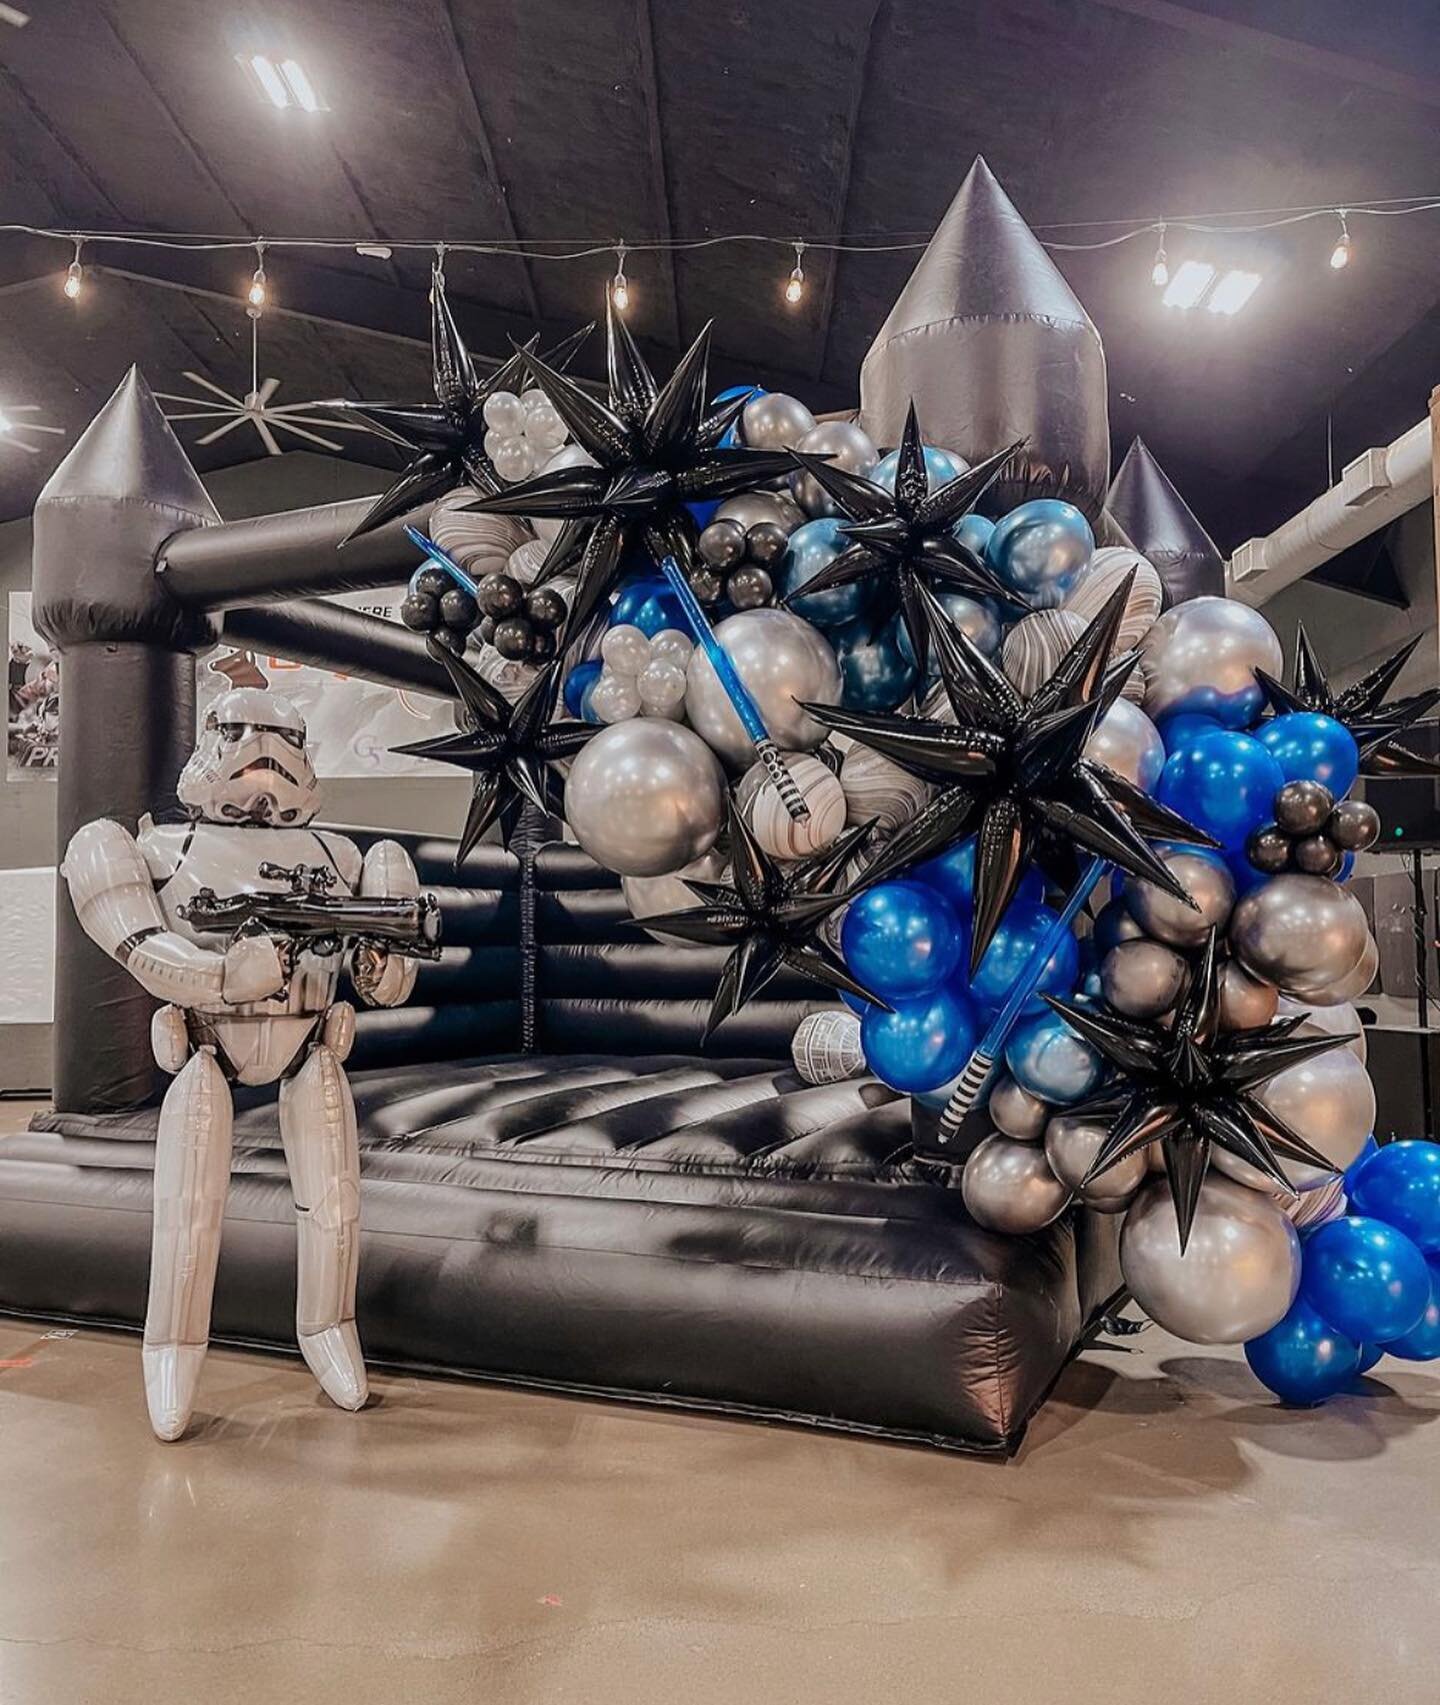 May the 4th be with you💥🌌
&bull;
&bull;
&bull;
#balloontherapyokc #balloons #balloongarlands #maythefourth #may4 #maythefourthbewithyou #maythe4thbewithyou #may #itsgonnabemay #starwars #starwarsparty #spaceranger #starwarsballoons #partydeckr #sta